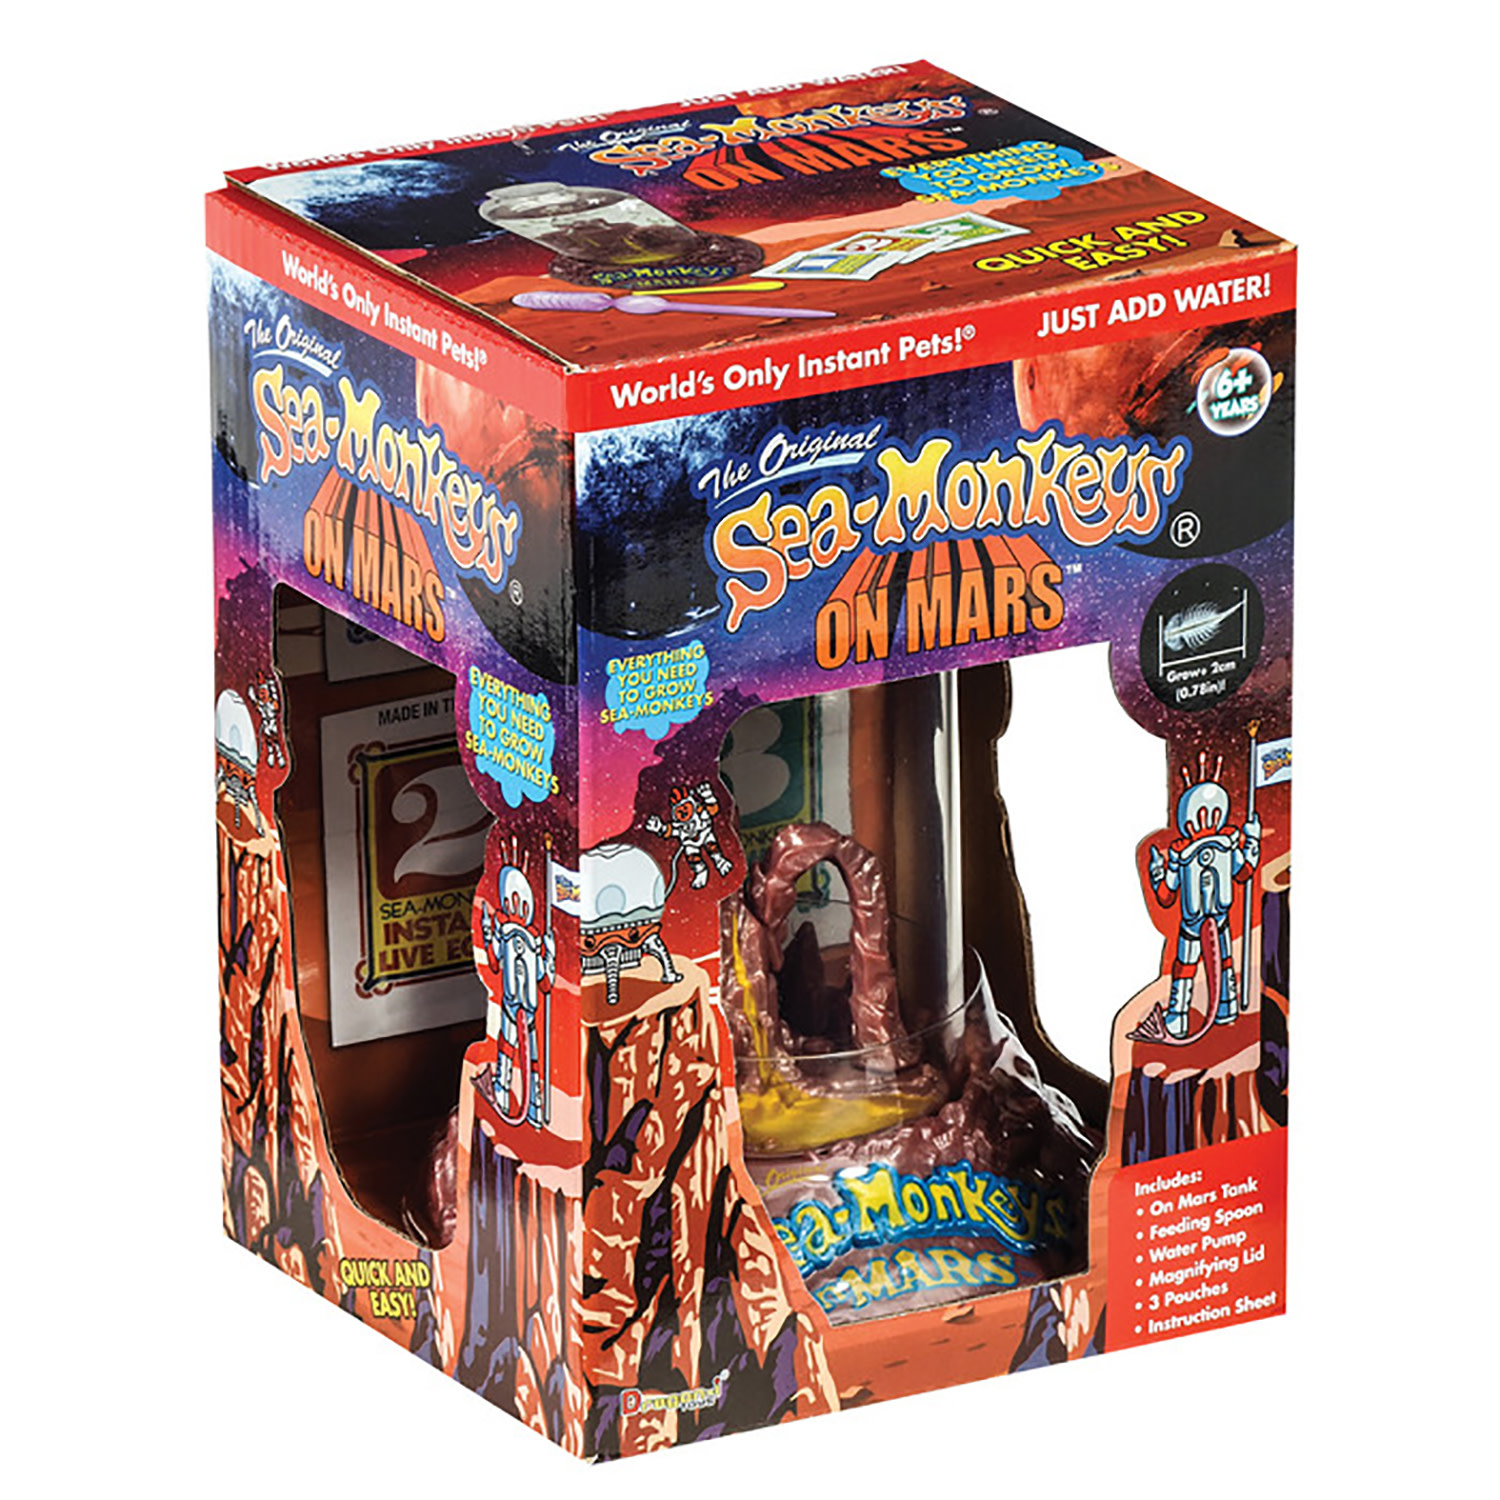 Sea-Monkey On Mars - PLAYNOW! Toys and Games